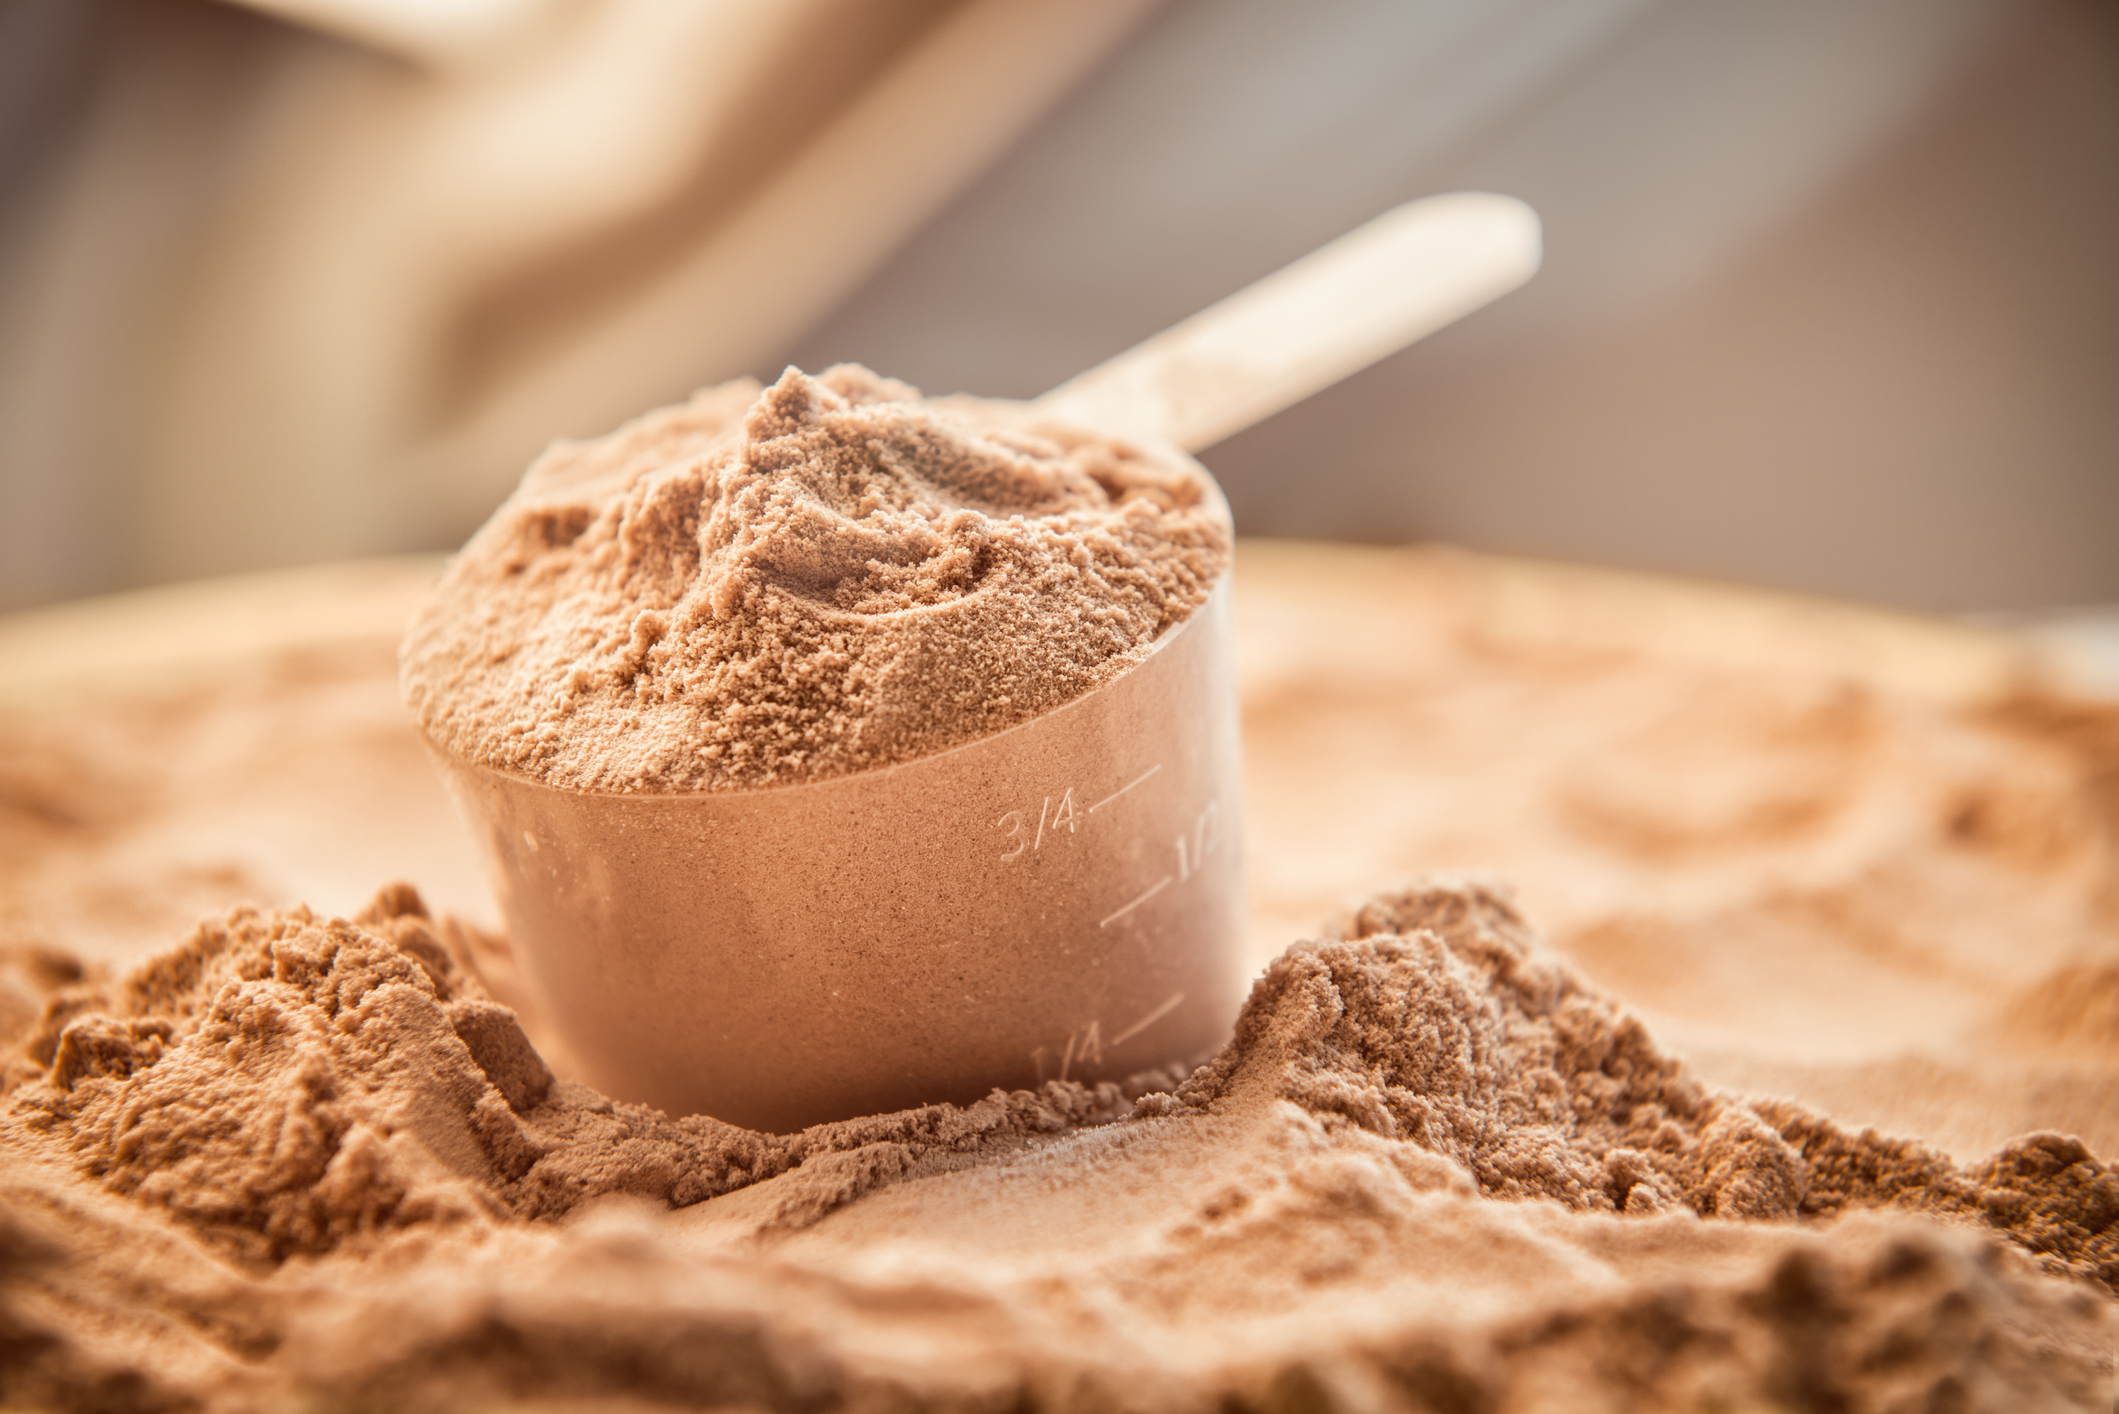 Sports nutrition brands charged 'crazy' whey protein prices due to low  supply